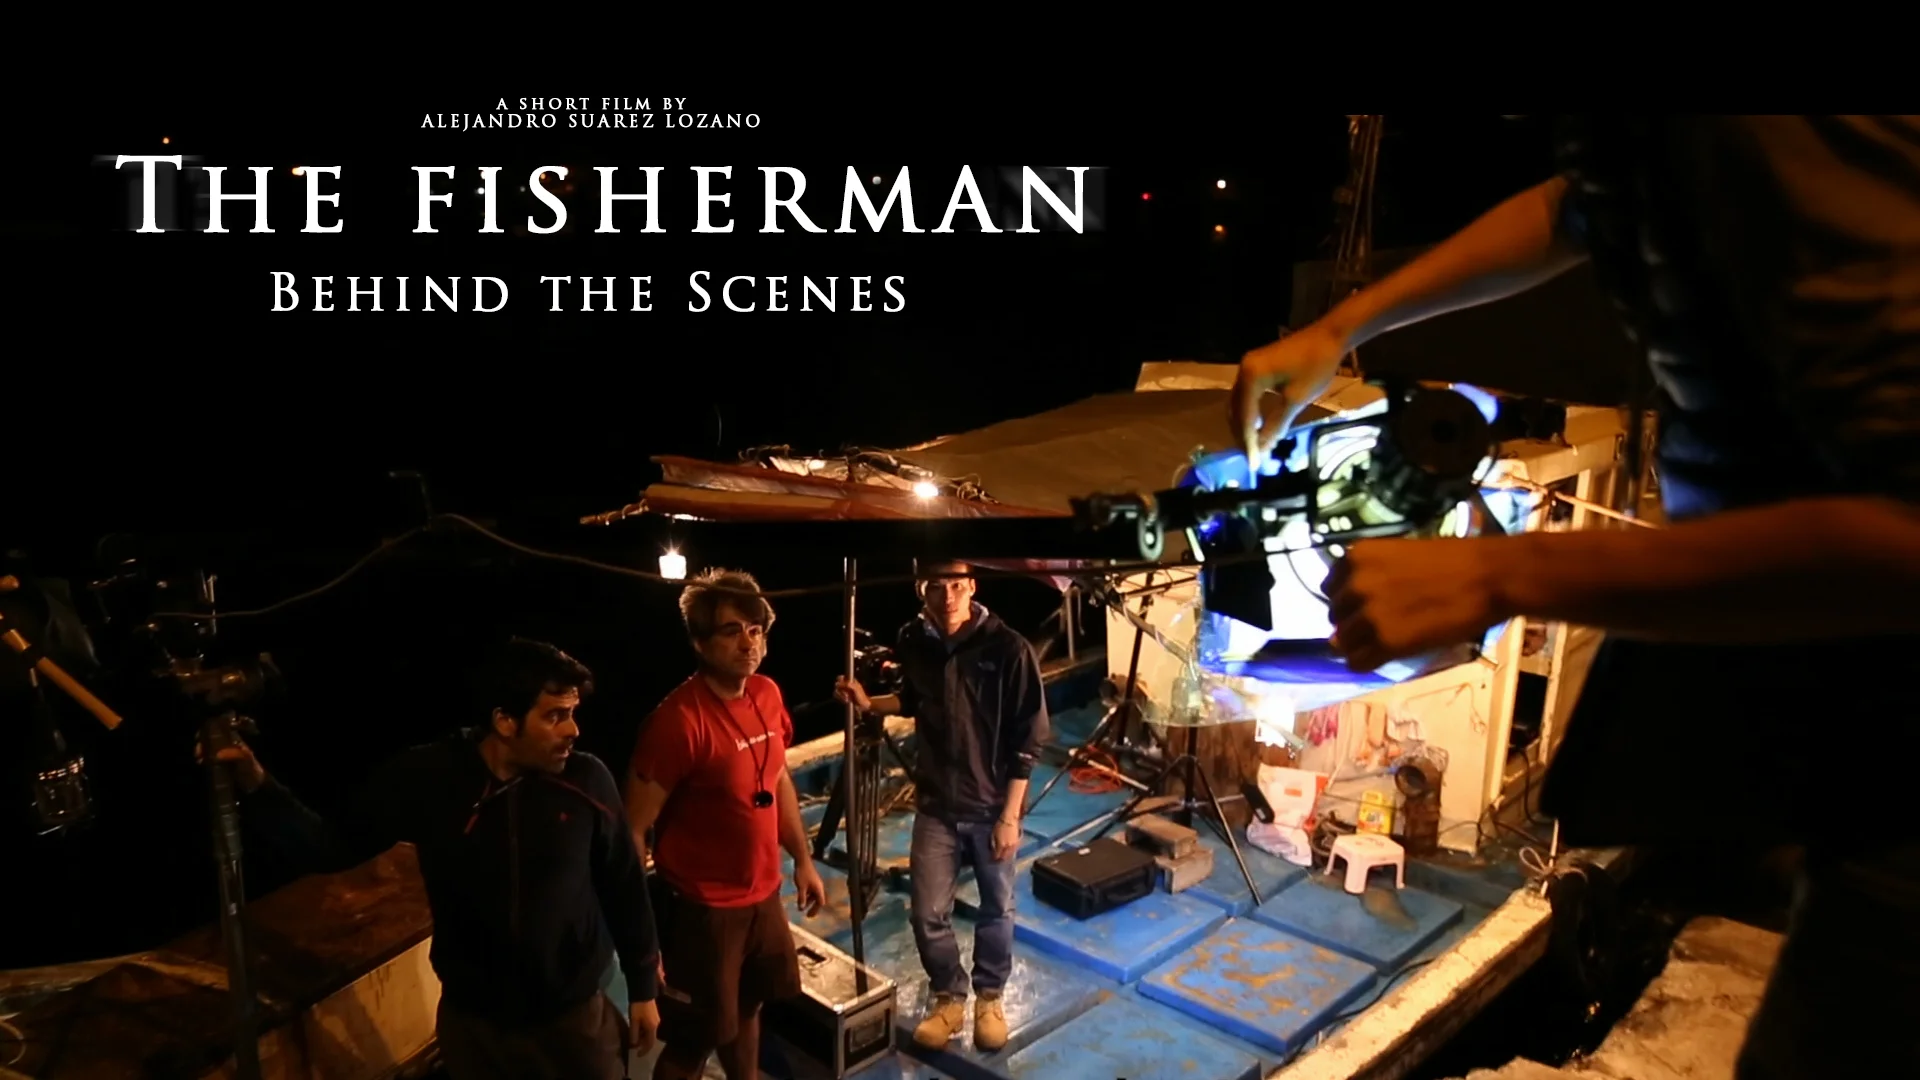 THE FISHERMAN - Behind the Scenes